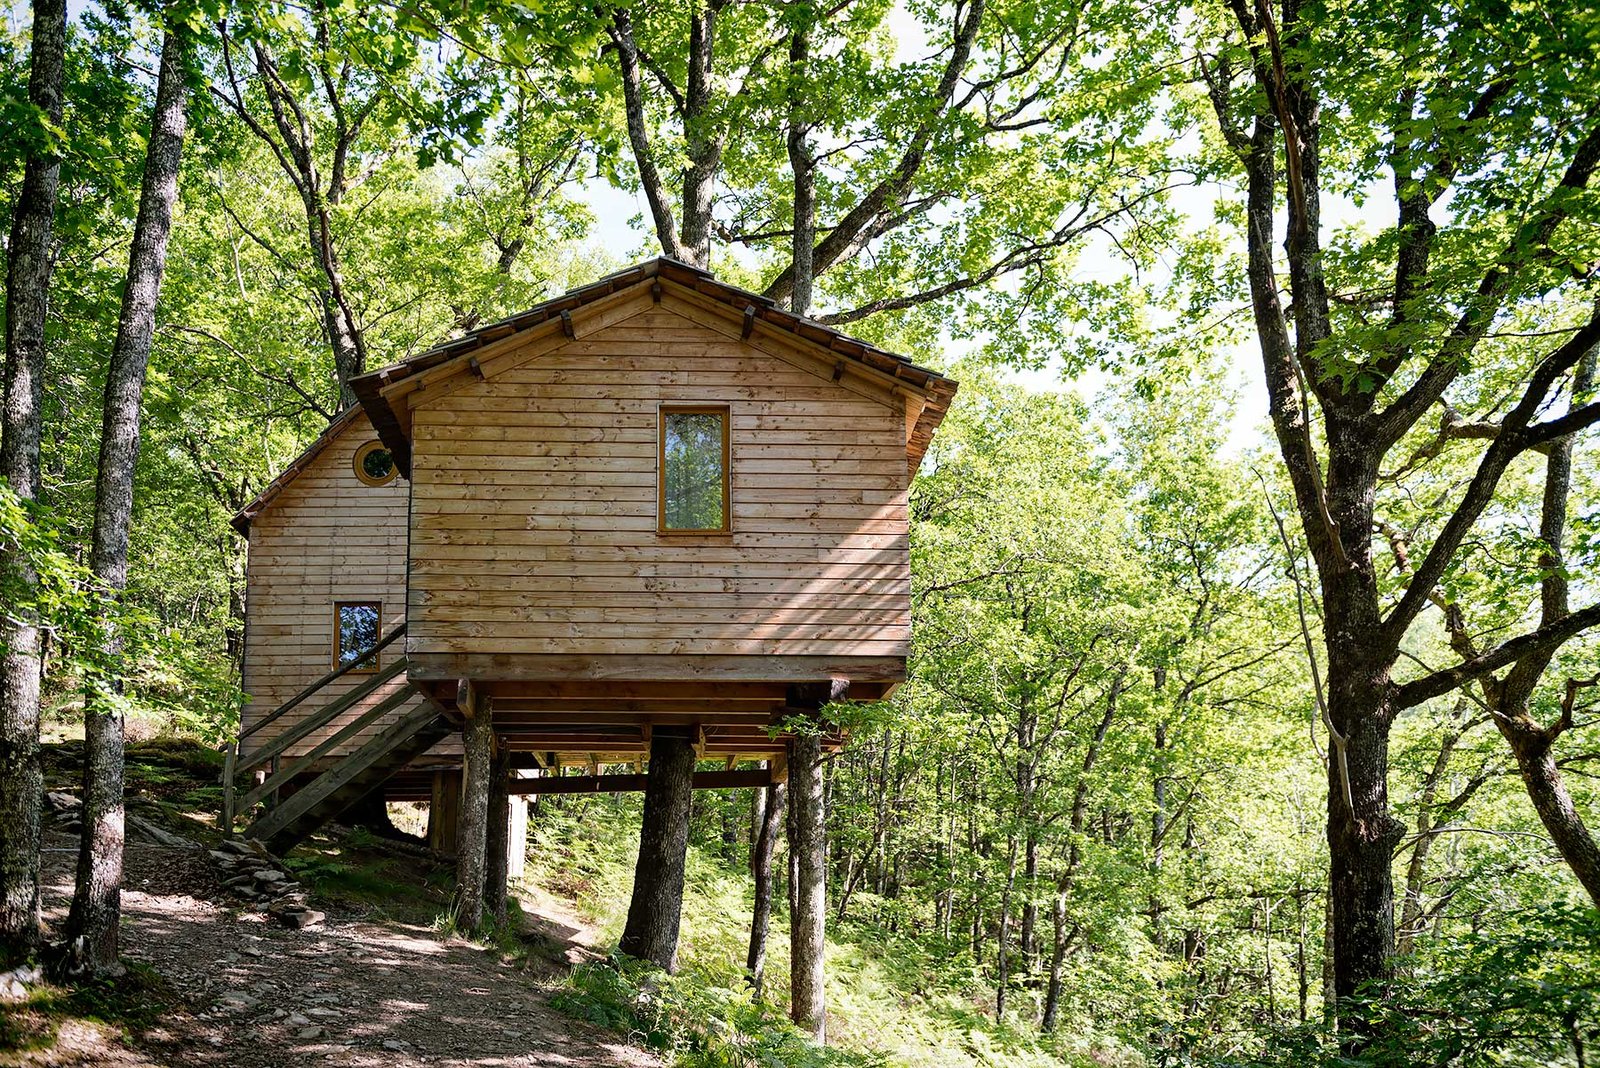 Where to stay in Corrèze (France). What about a beautiful tree house overlooking the Dordogne river.